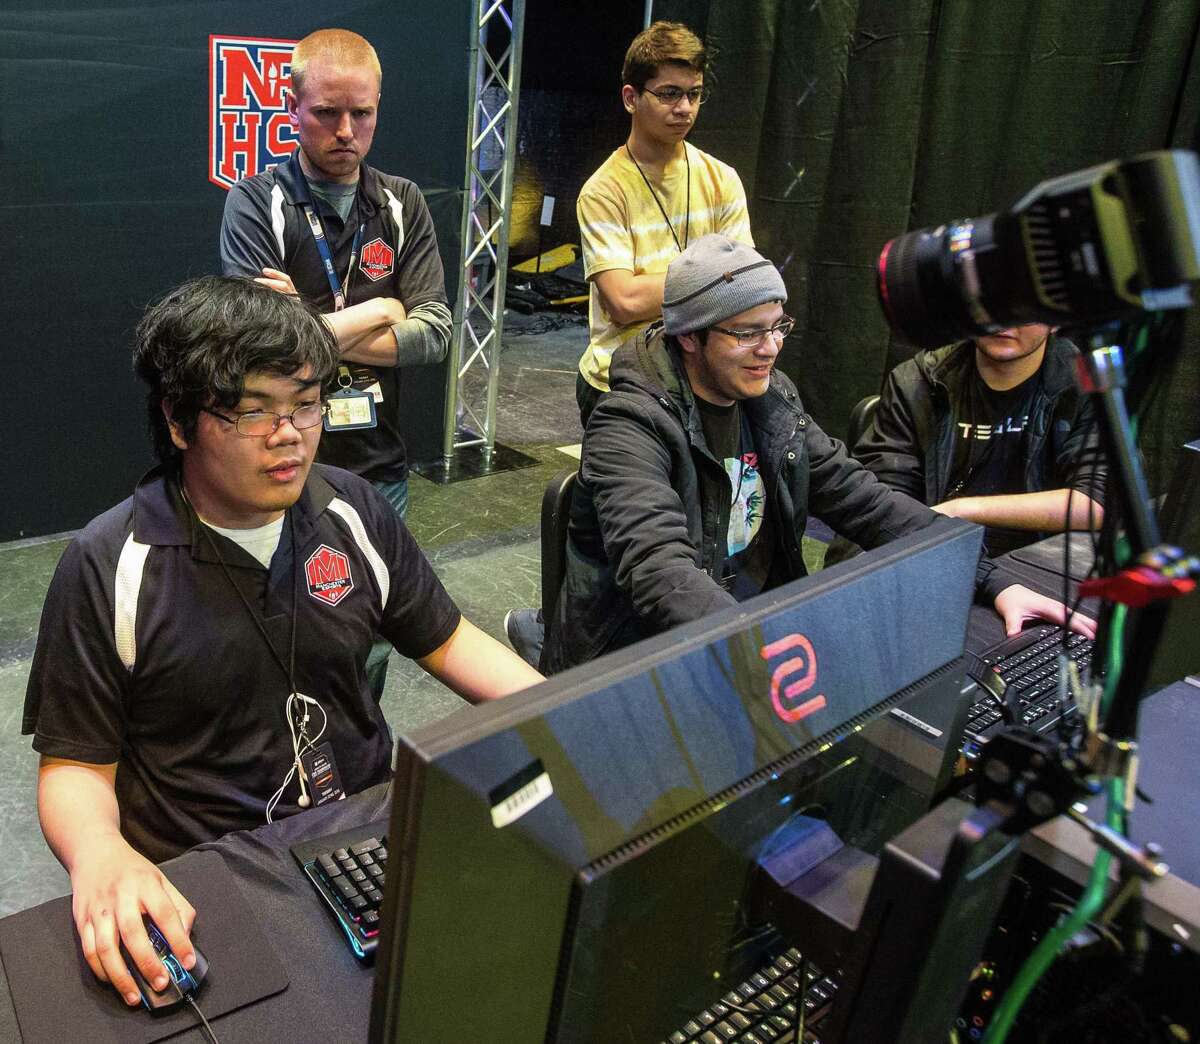 Manchester High School eSports coach Sam Warner, back left, watches over team members Justin Lumaque, left front, and Bryan Santaban during the CIAC eSports championship.